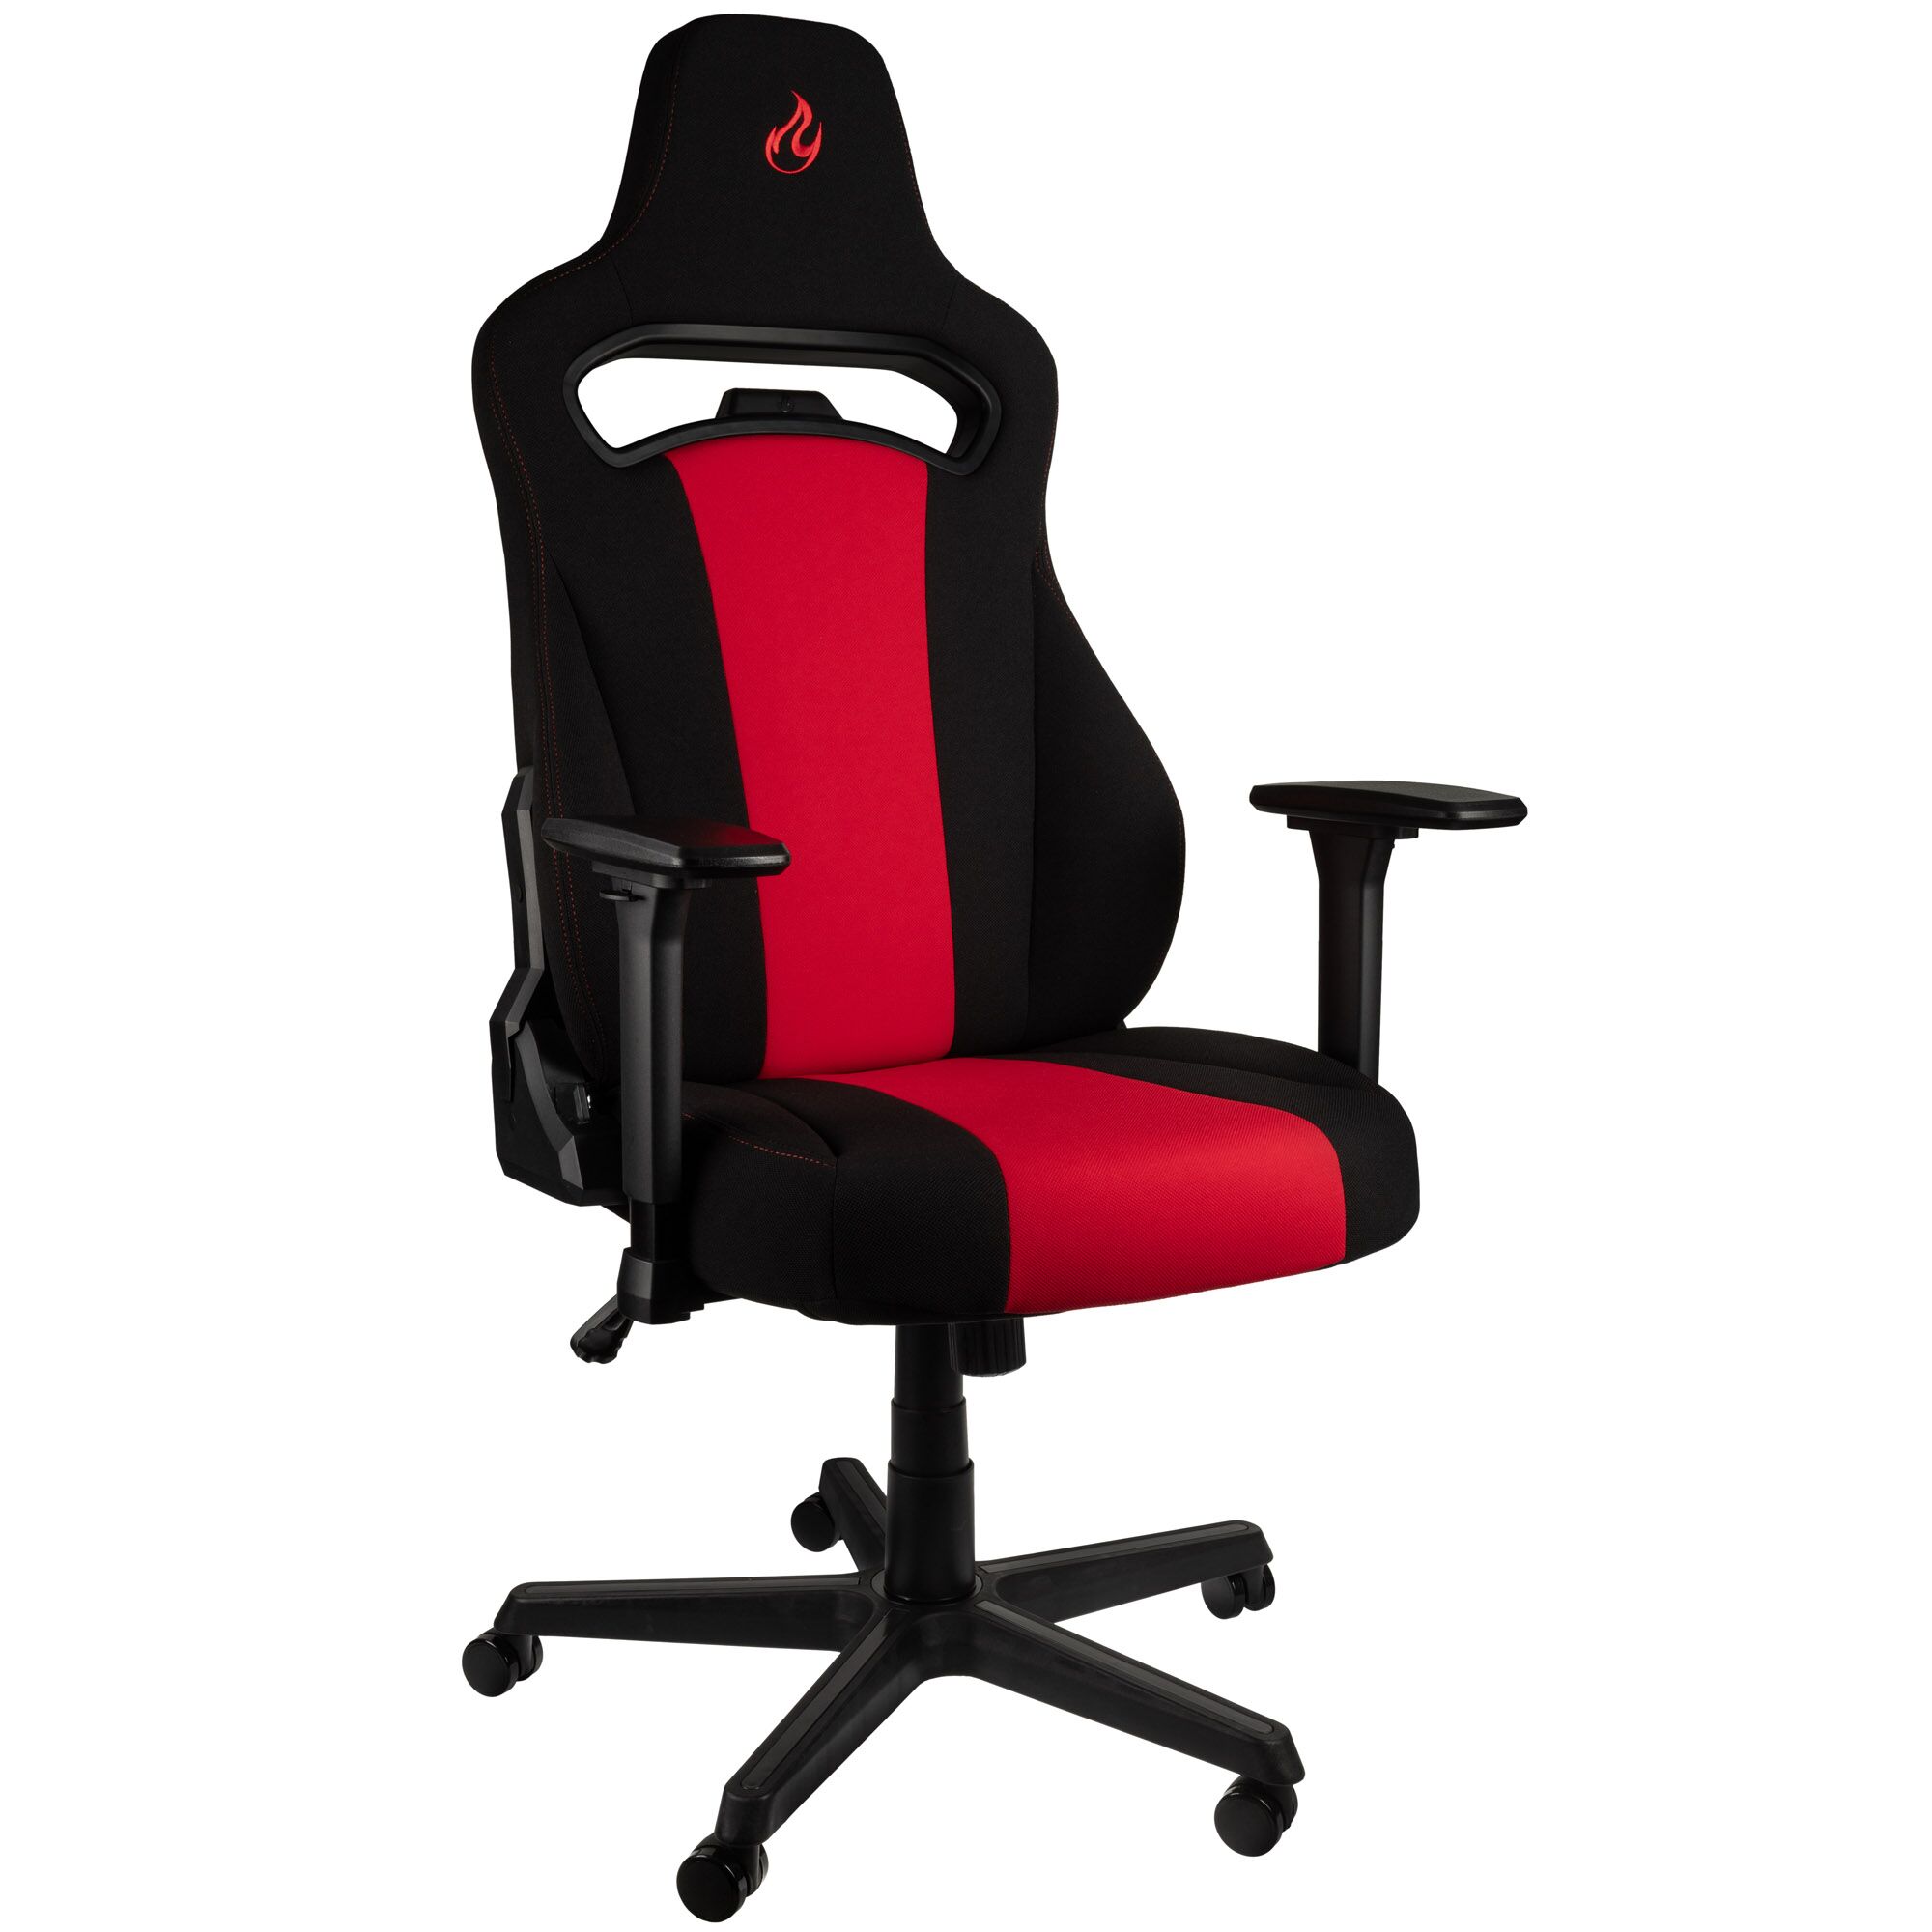 Nitro Concepts E250 Gaming Chair - black/red